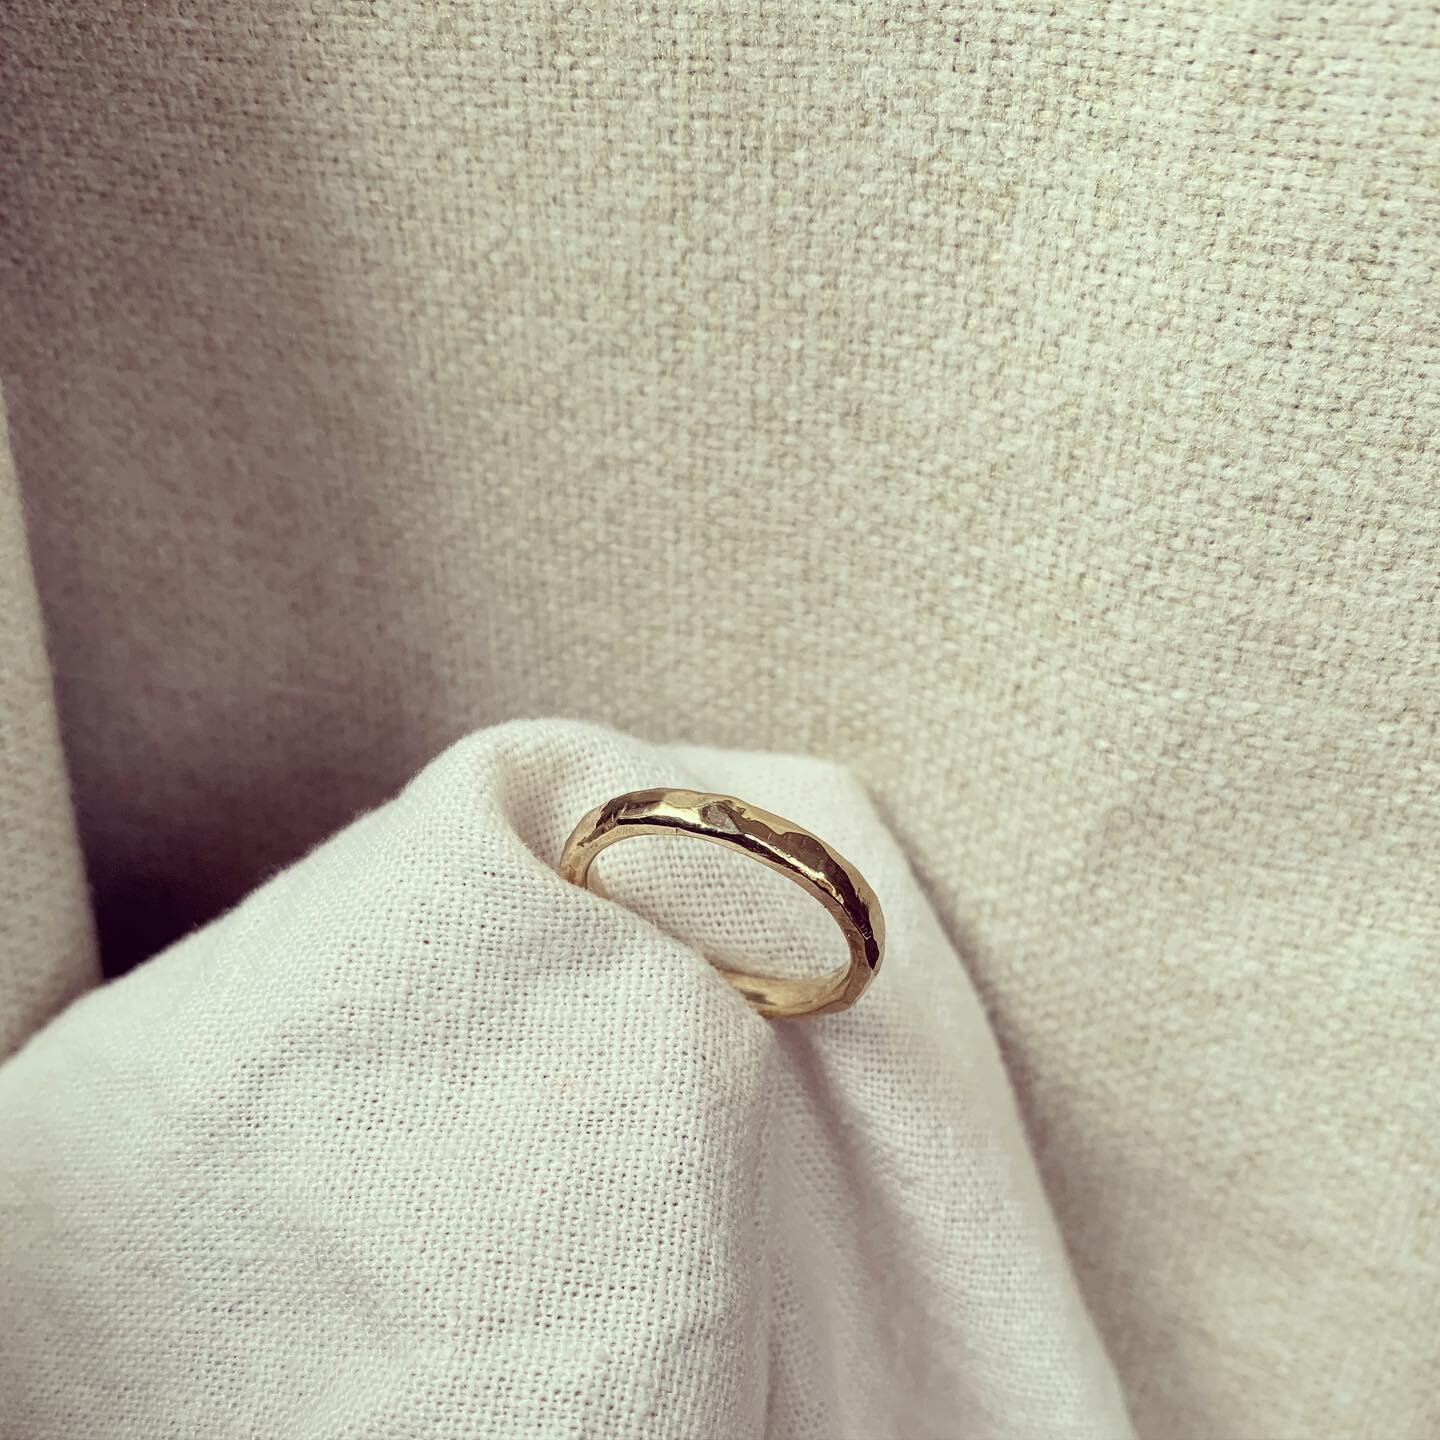 C O M M I S S I O N ◻️a handcarved wedding band remodelled from J&rsquo;s original 18ct gold wedding ring 🤍